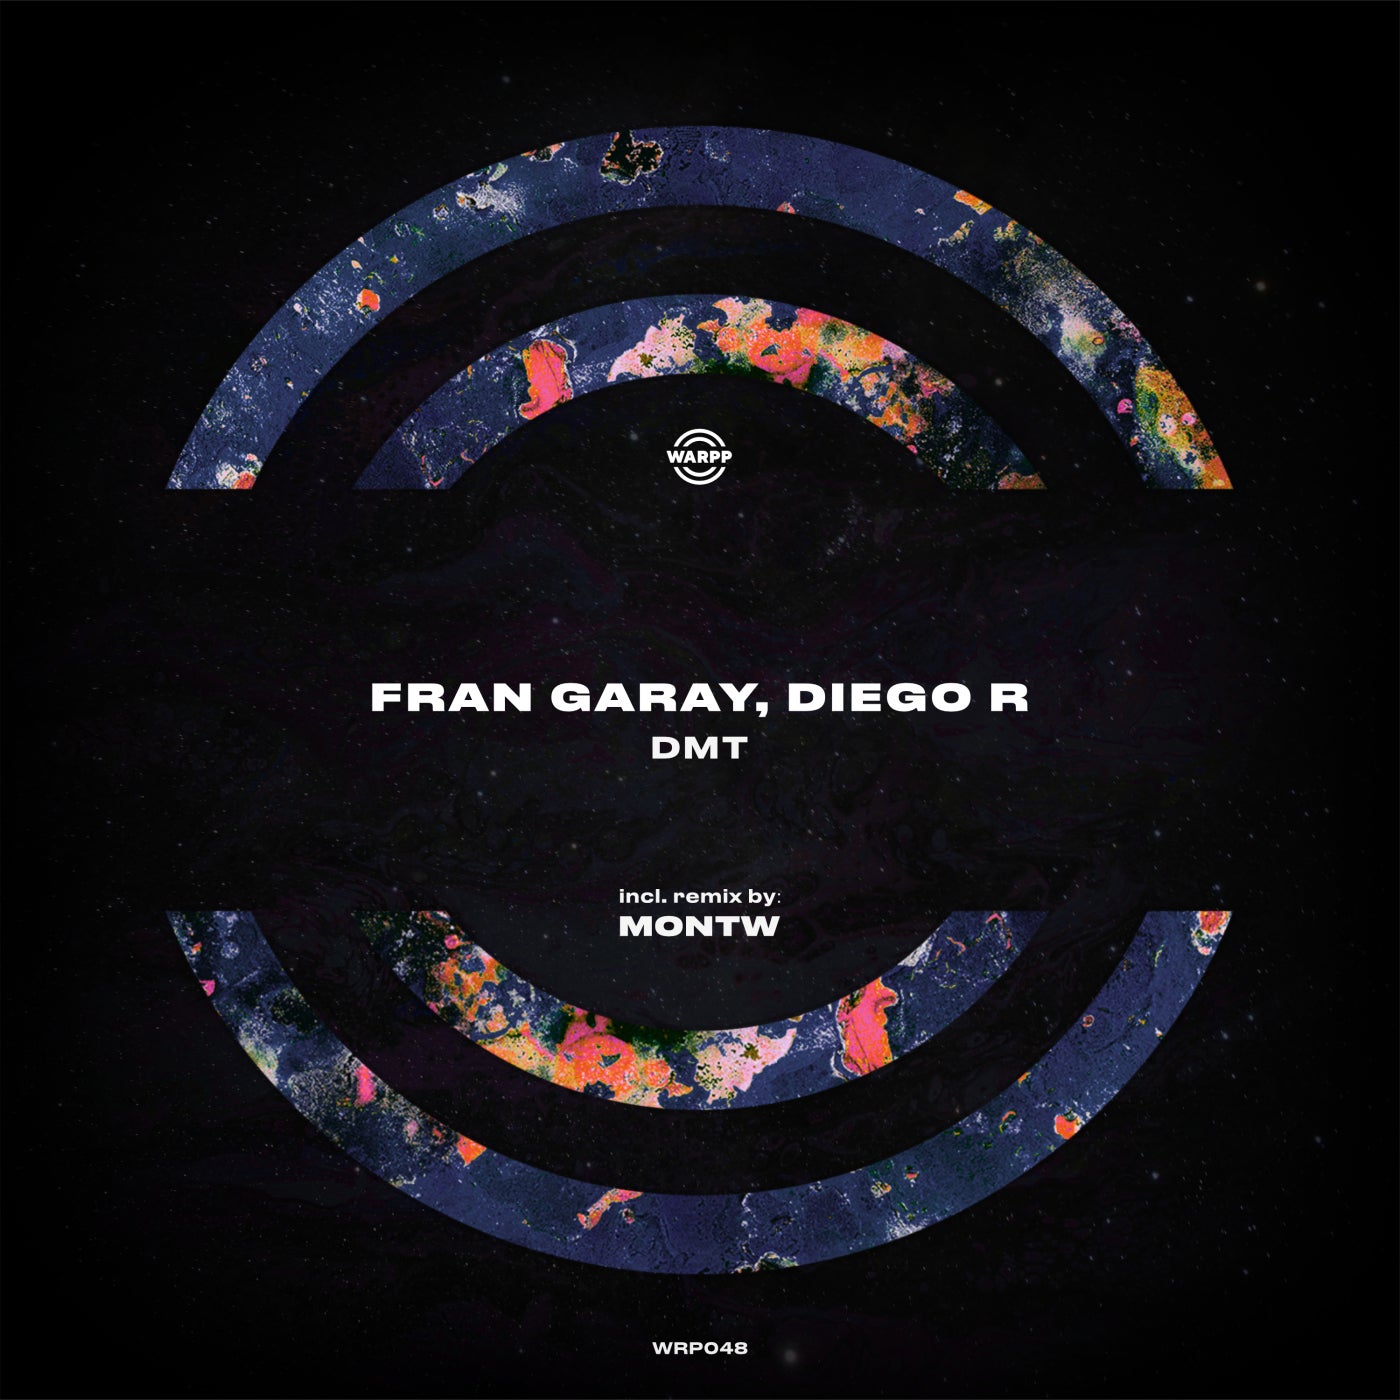 image cover: Diego R, Fran Garay - Dmt (Incl. Remix by Montw) on WARPP